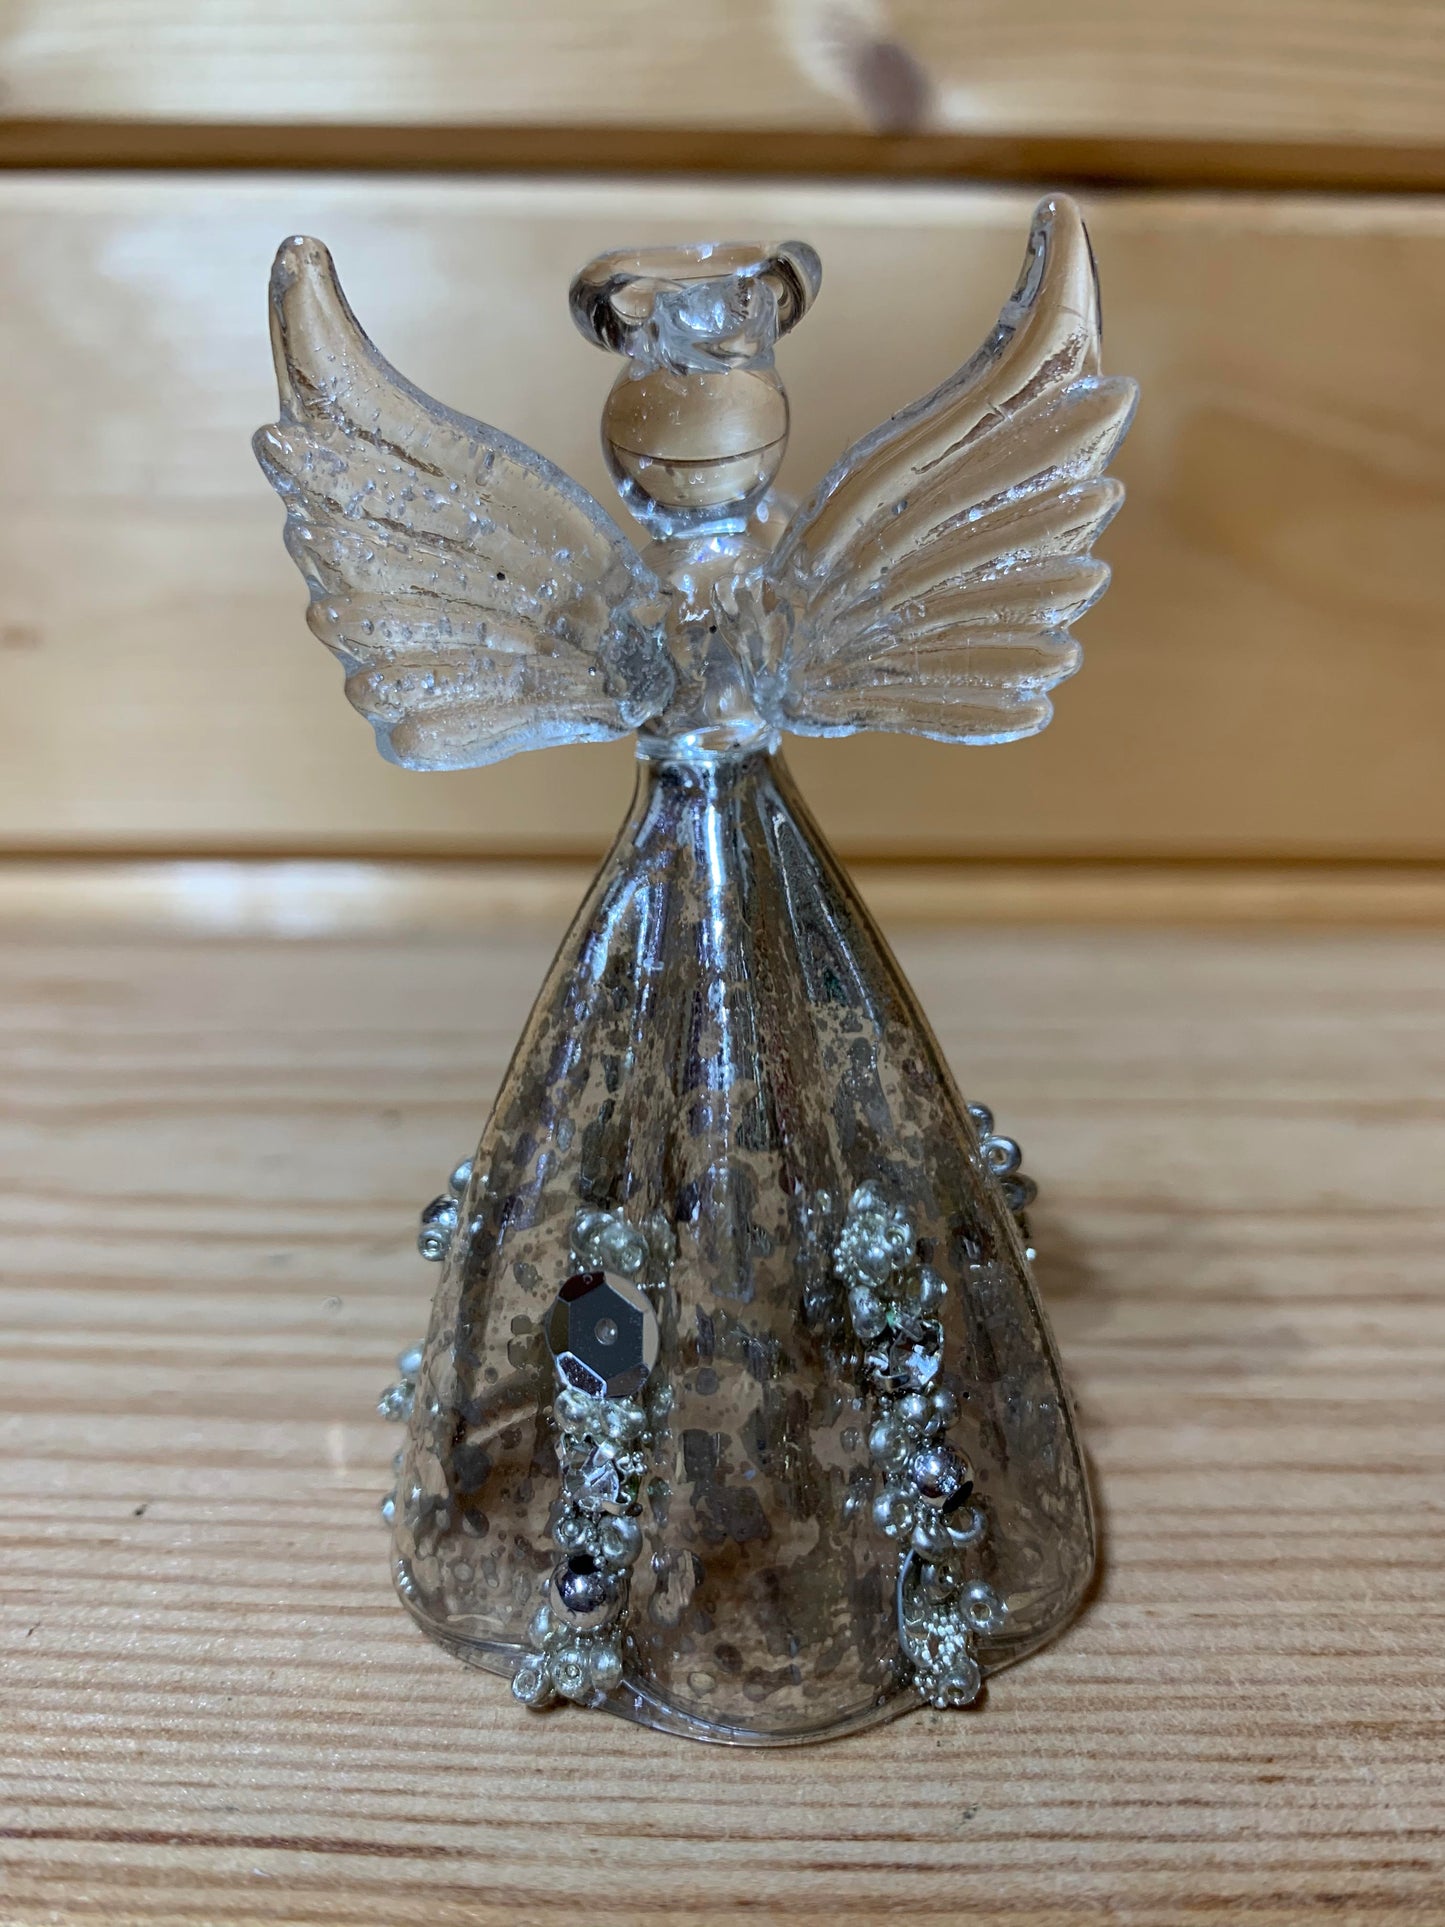 This stunning antique style glass angel holding a heart with silver beading and a fluted skirt will be the perfect finishing touch to your Christmas tree!